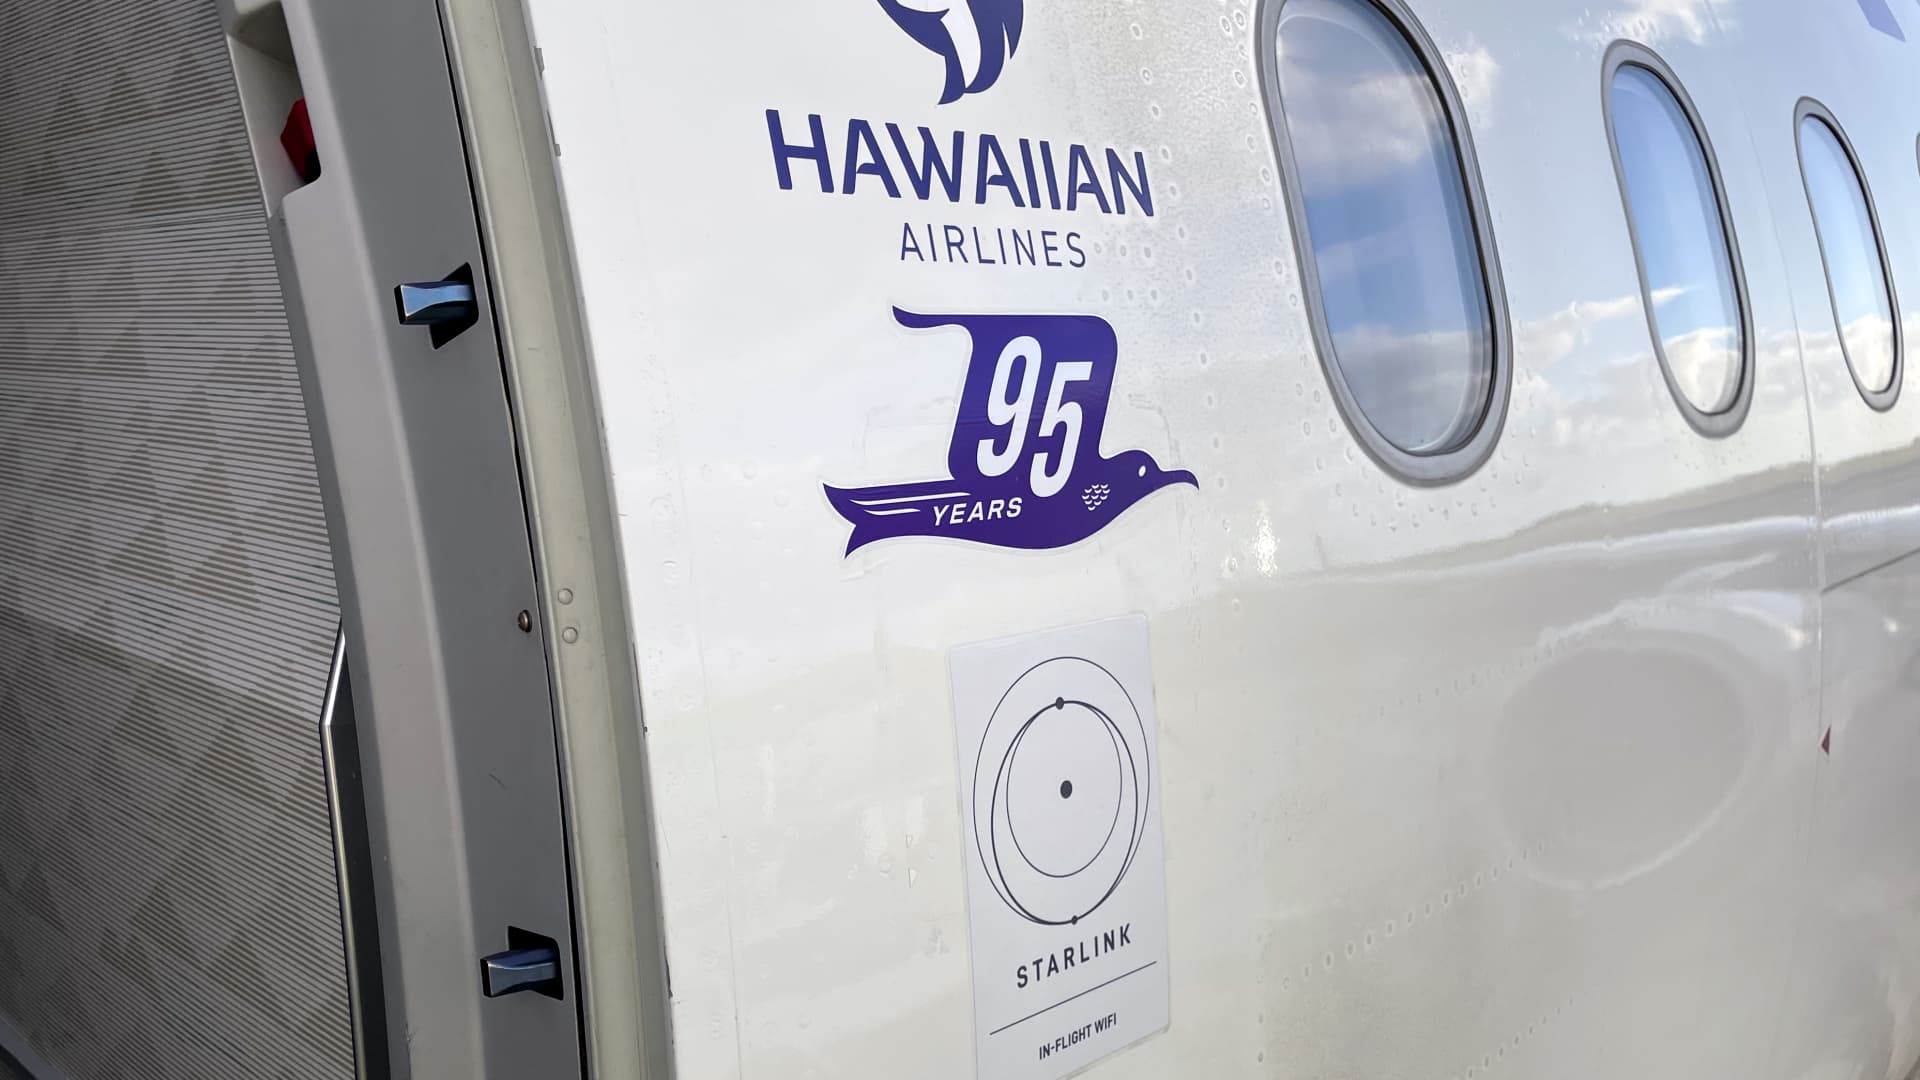 Hawaiian Airlines debuts free inflight Wi-Fi from SpaceX’s Starlink